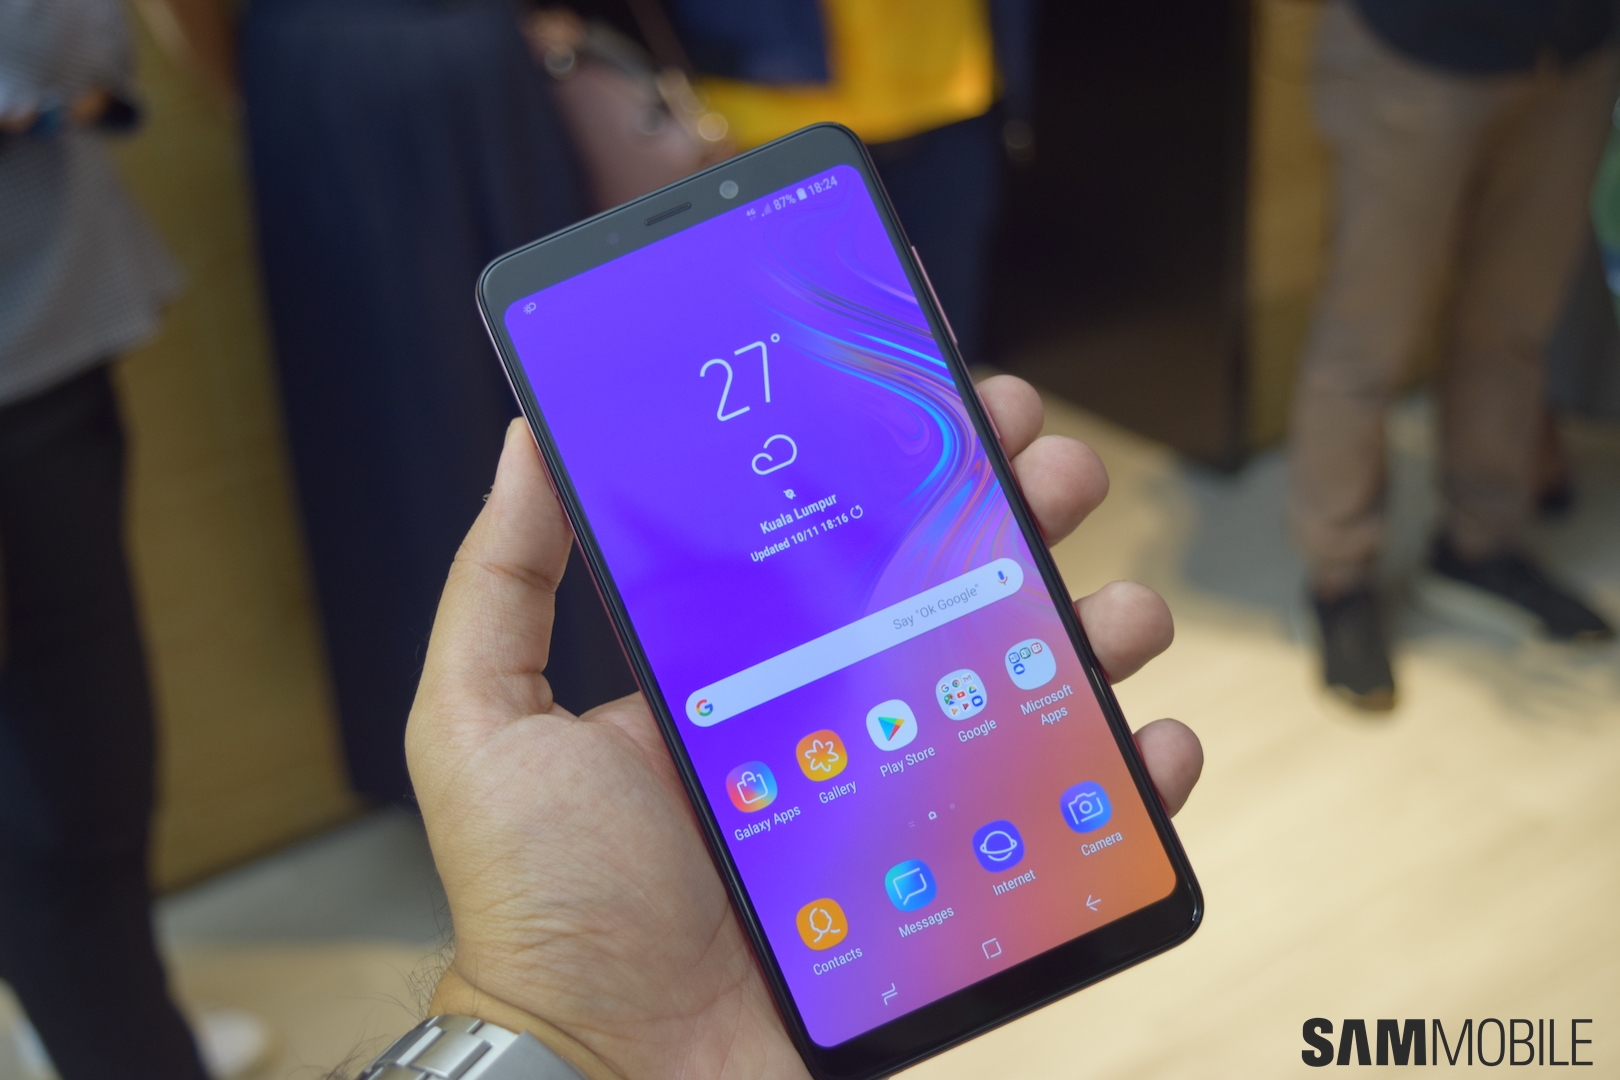 Samsung Galaxy A9 PLUS - First Look, Specifications, Official